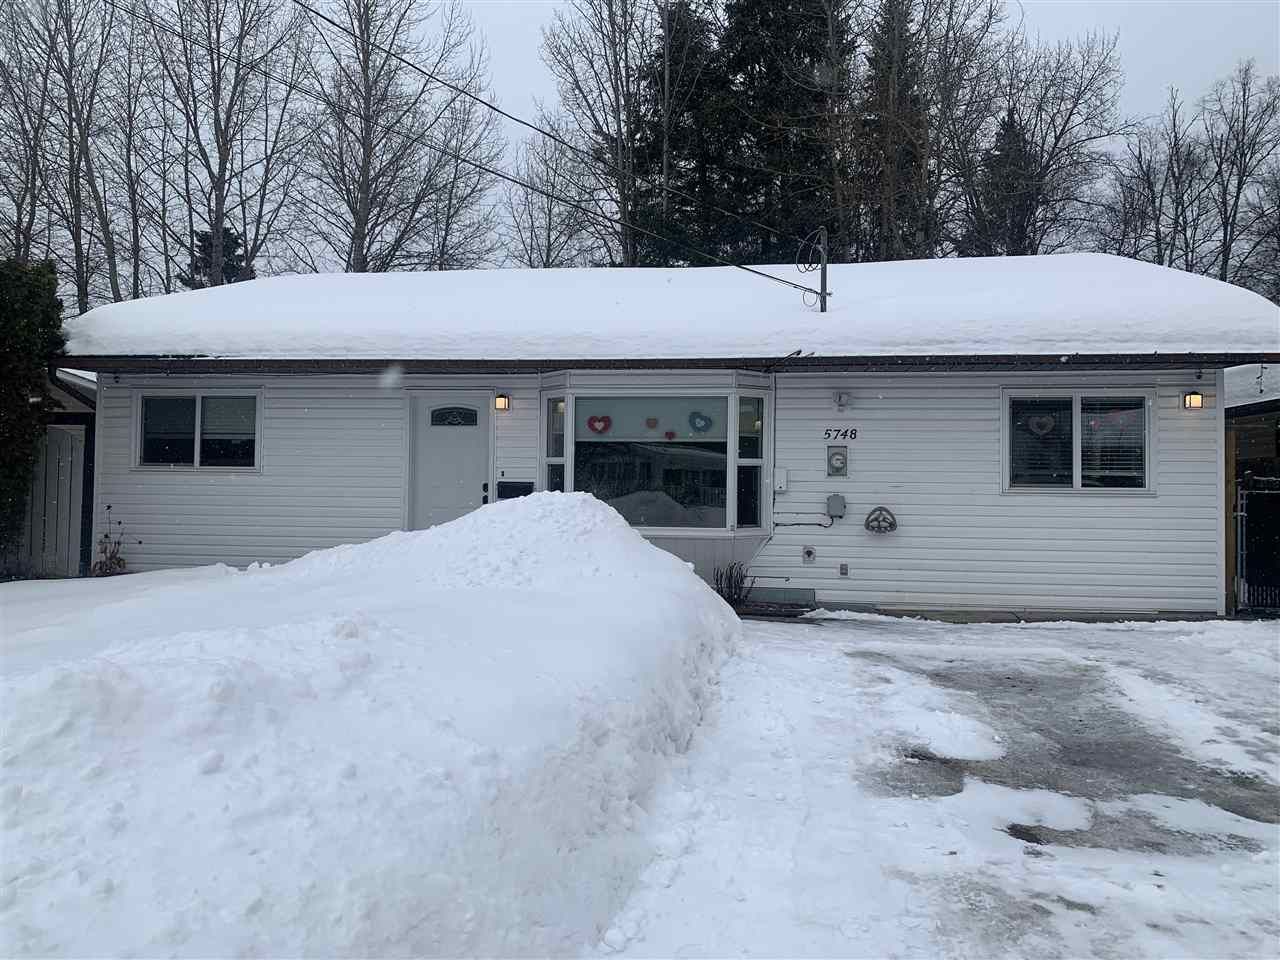 Main Photo: 5748 LEHMAN Street in Prince George: Hart Highway House for sale (PG City North (Zone 73))  : MLS®# R2543653